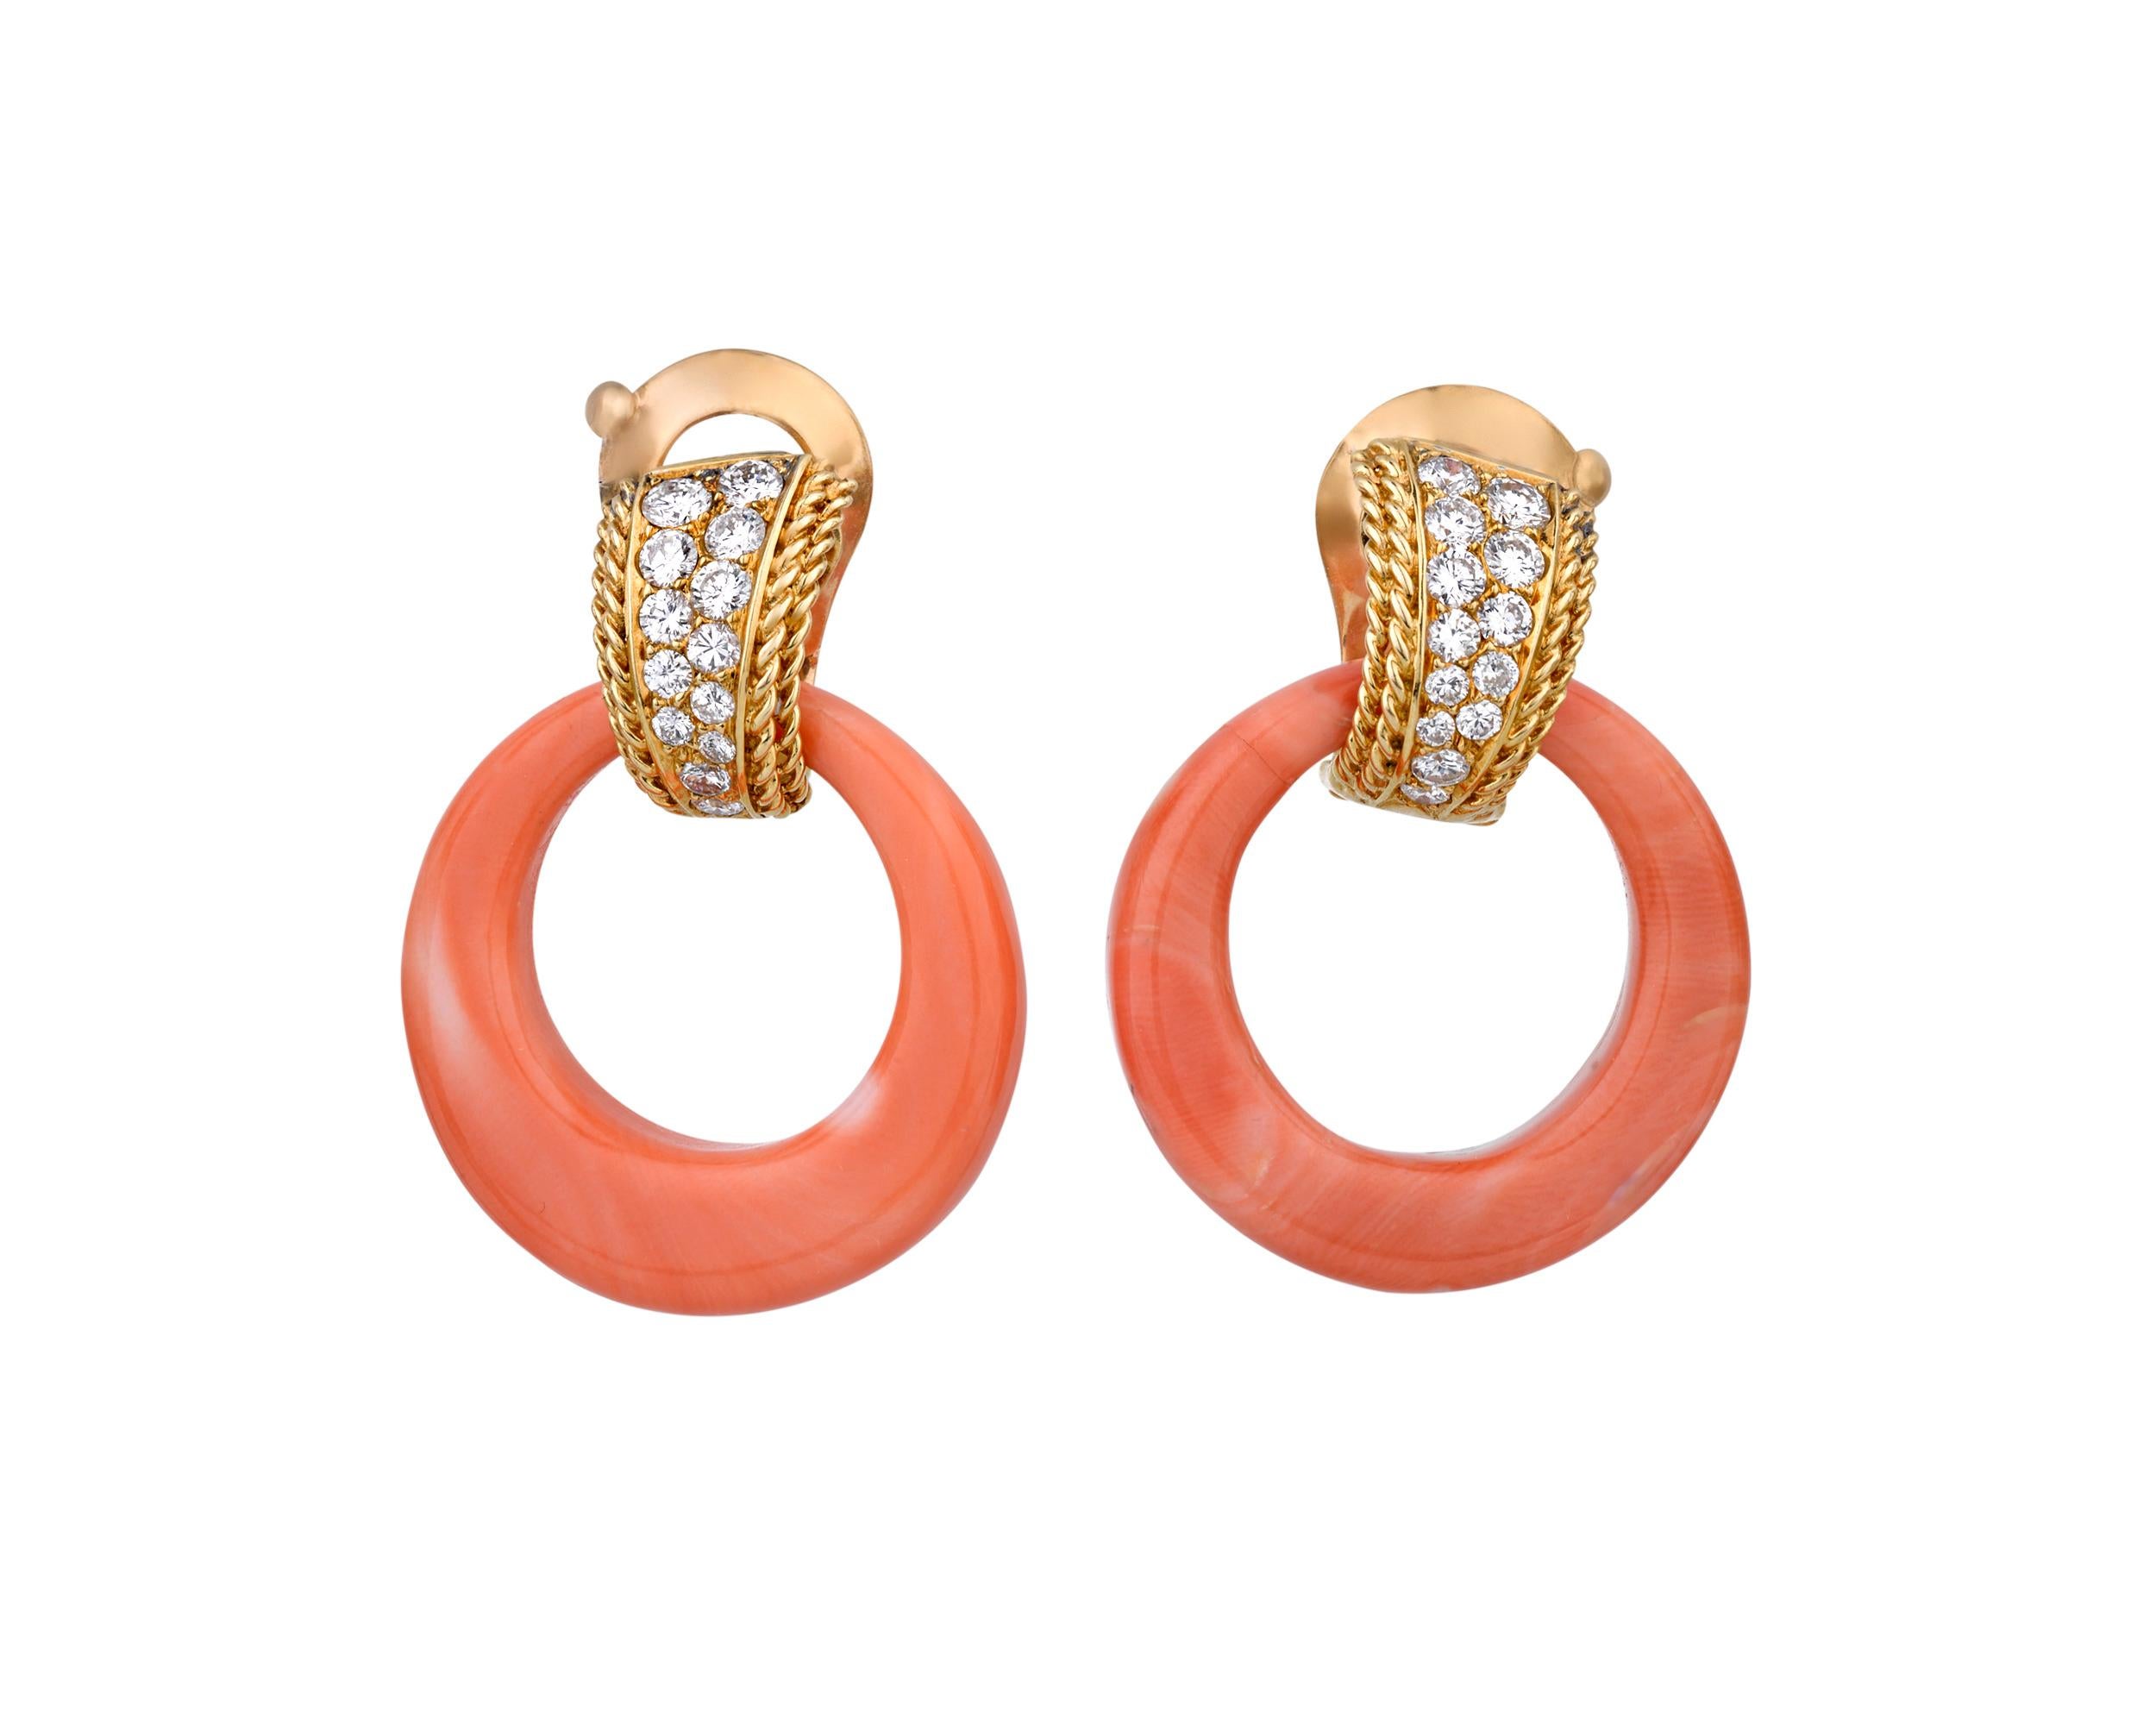 Striking coral forms these stunning hoop earrings by renowned French firm Van Cleef & Arpels. The expertly cut coral hoops are connected by a cluster of round diamonds set in 18K yellow gold. Since the firm's inception in 1896, Van Cleef & Arpels